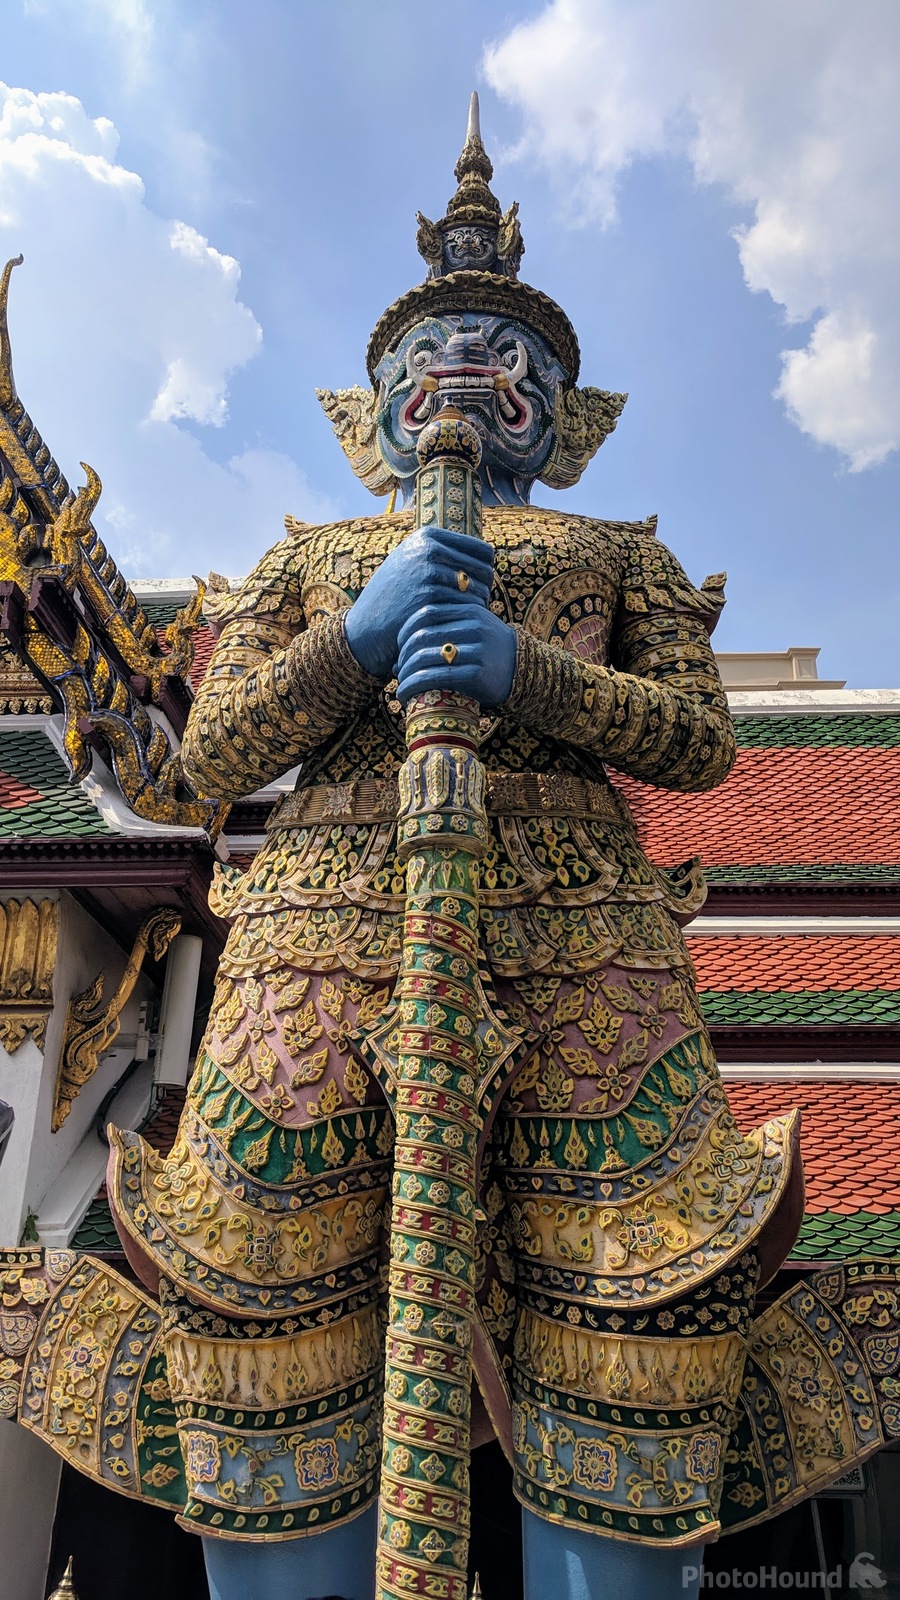 Image of The Grand Palace by Tim Oneil